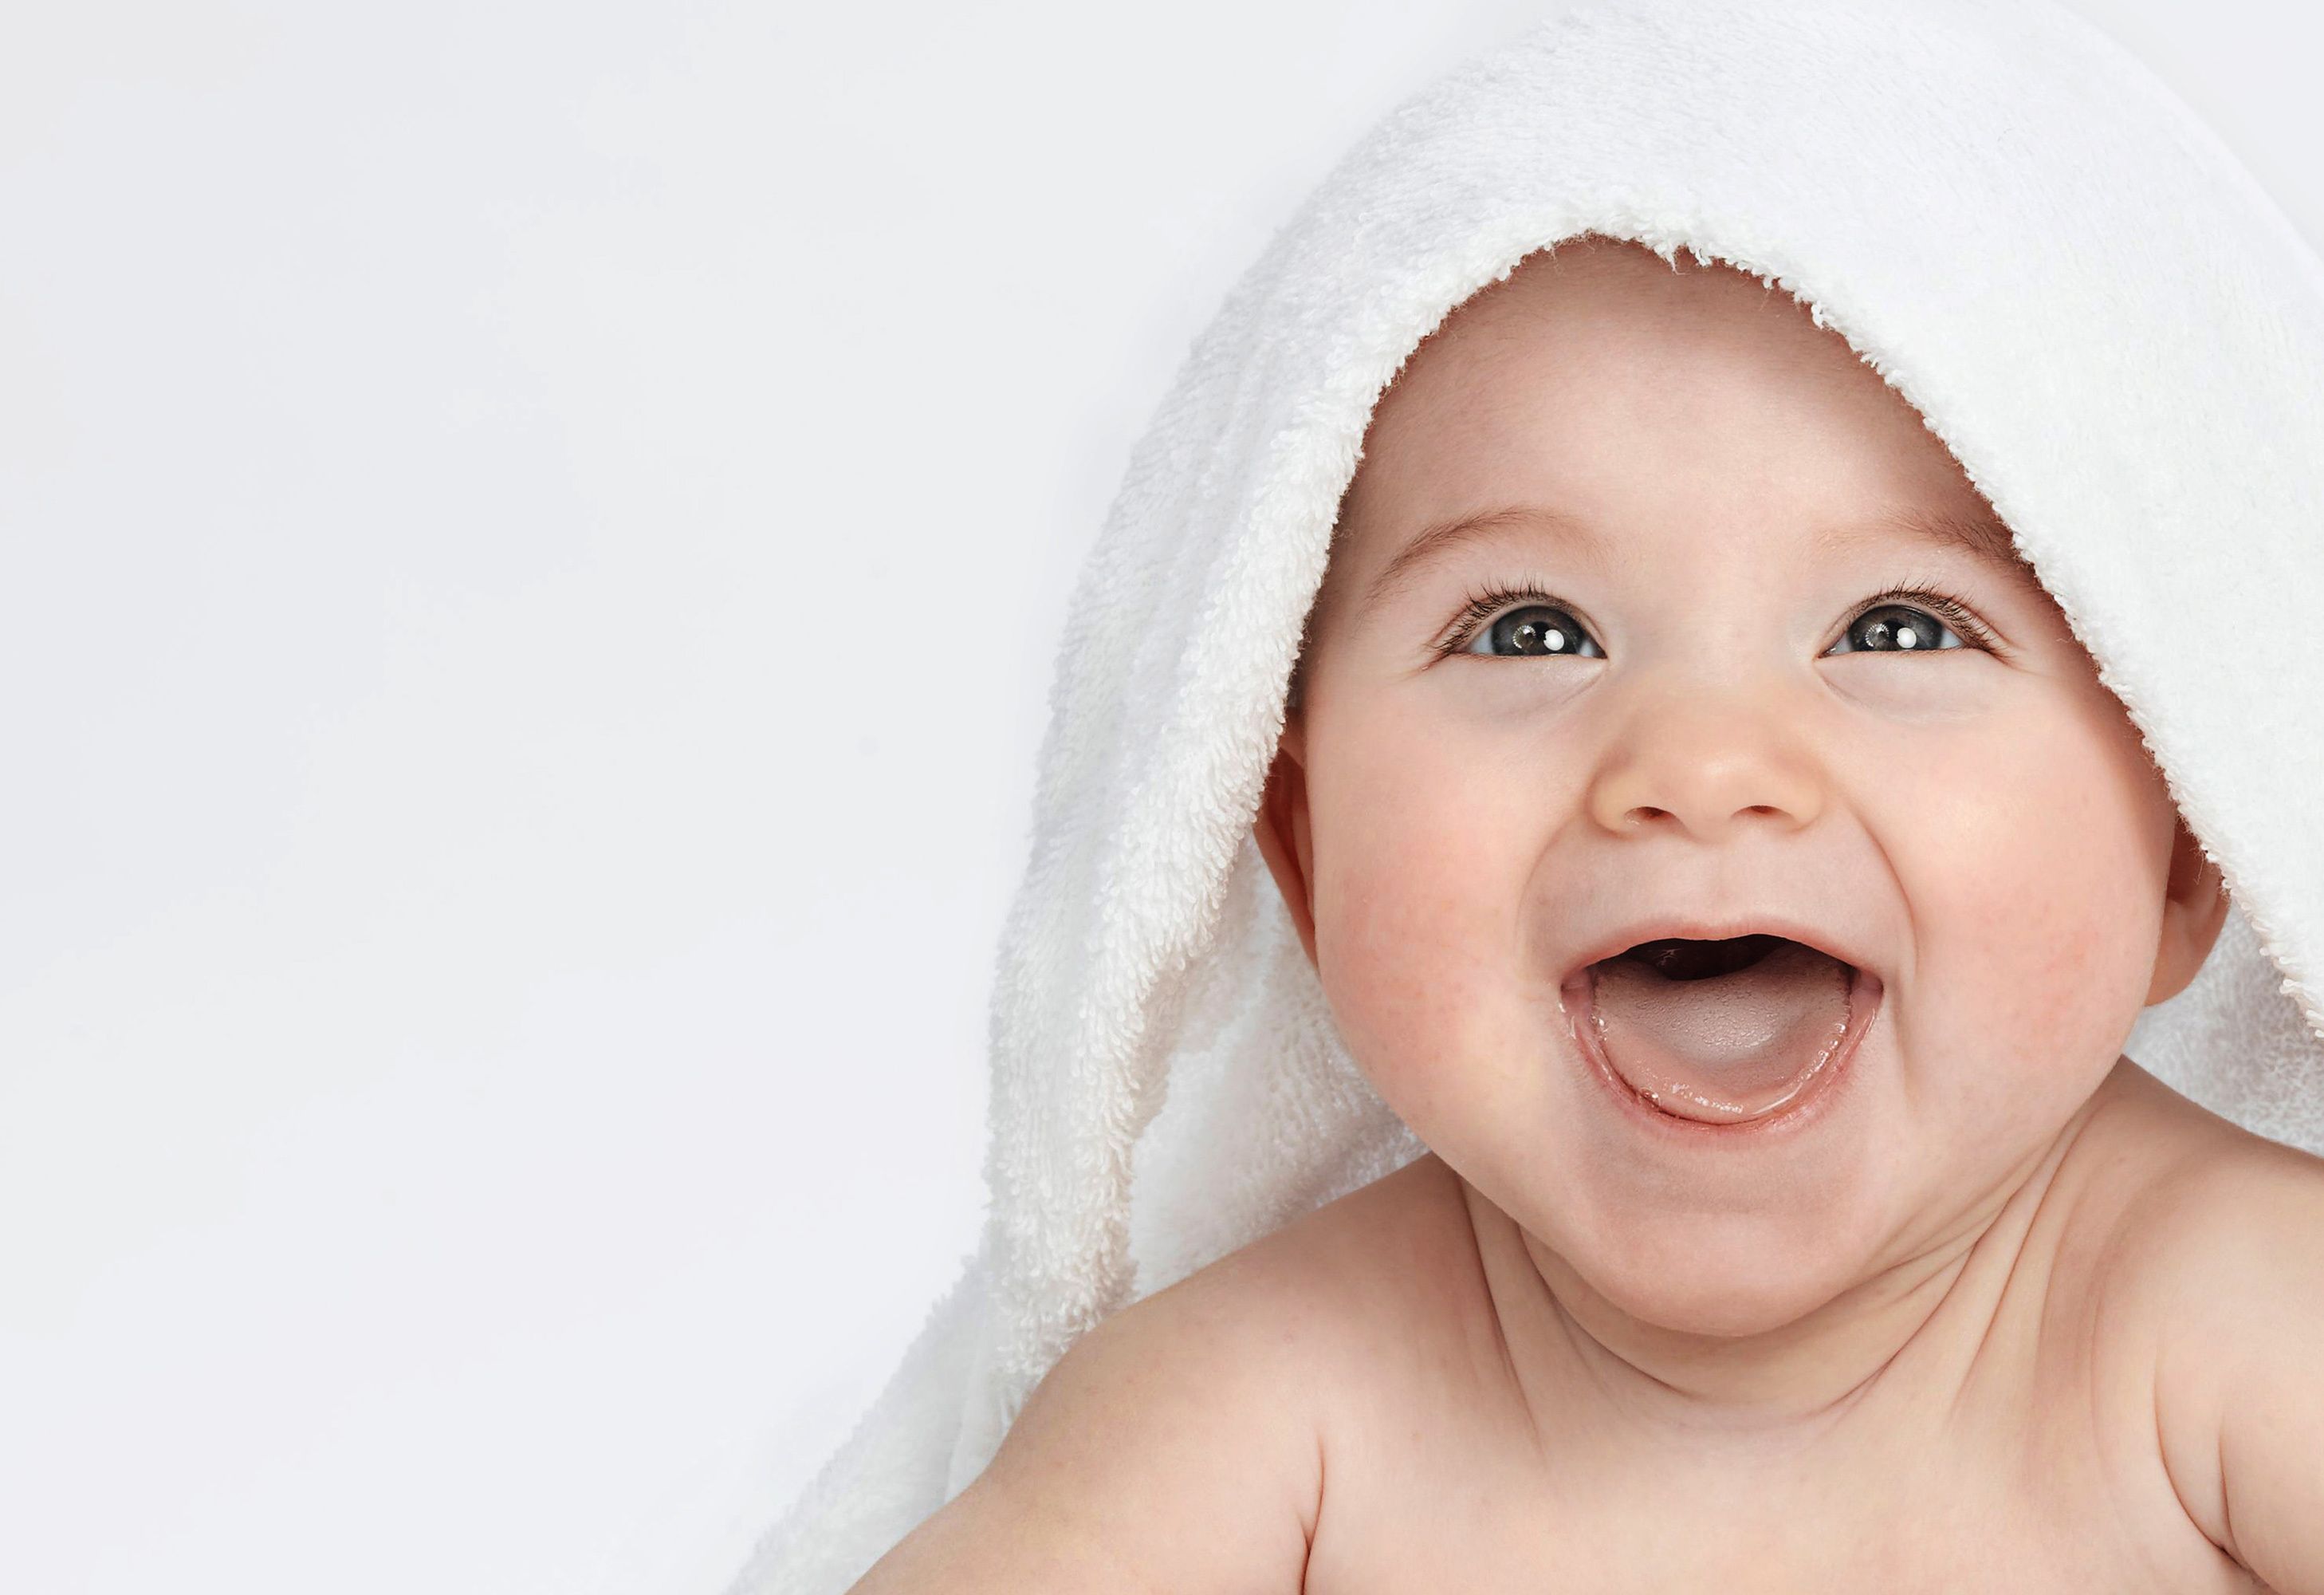 funny and laugh: photo of babies laughing